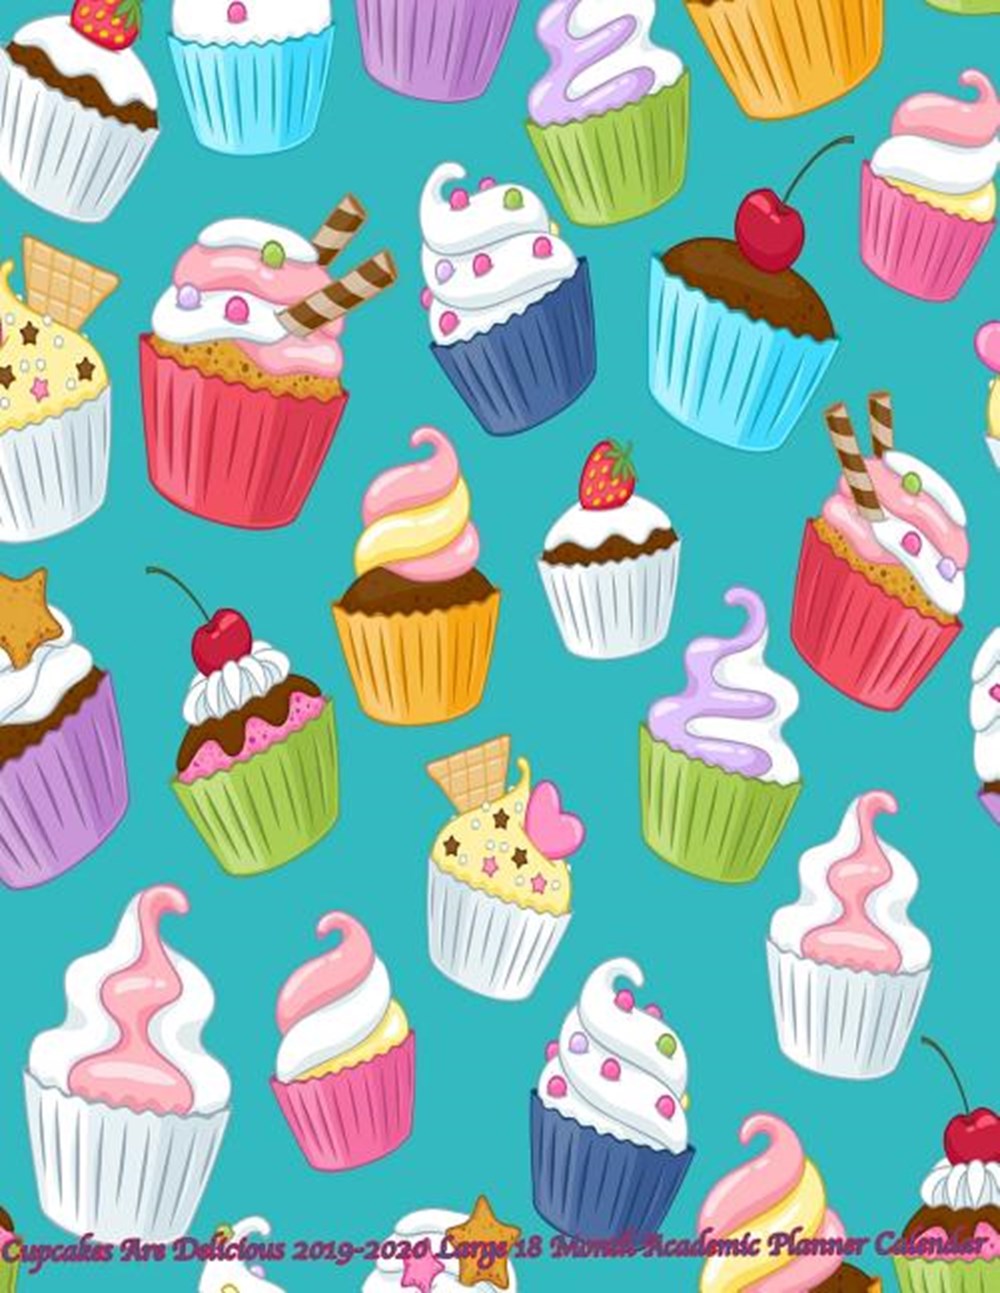 Cupcakes Are Delicious 2019-2020 Large 18 Month Academic Planner Calendar July 2019 To December 2020